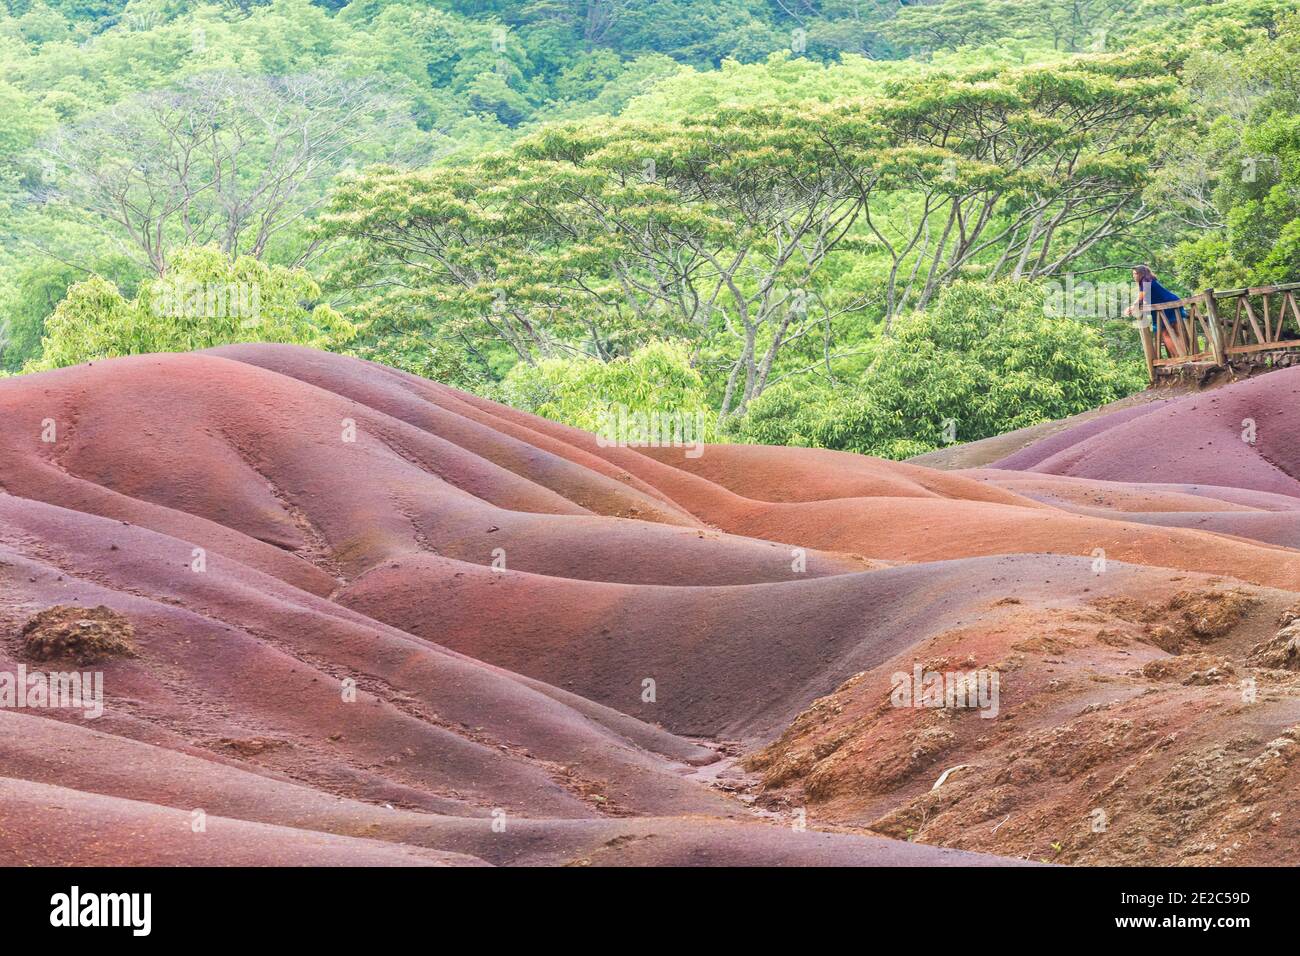 Mauritius, Africa - Jan 2021: Girl looking at Seven colored earth in Chamarel park, Mauritius island Stock Photo